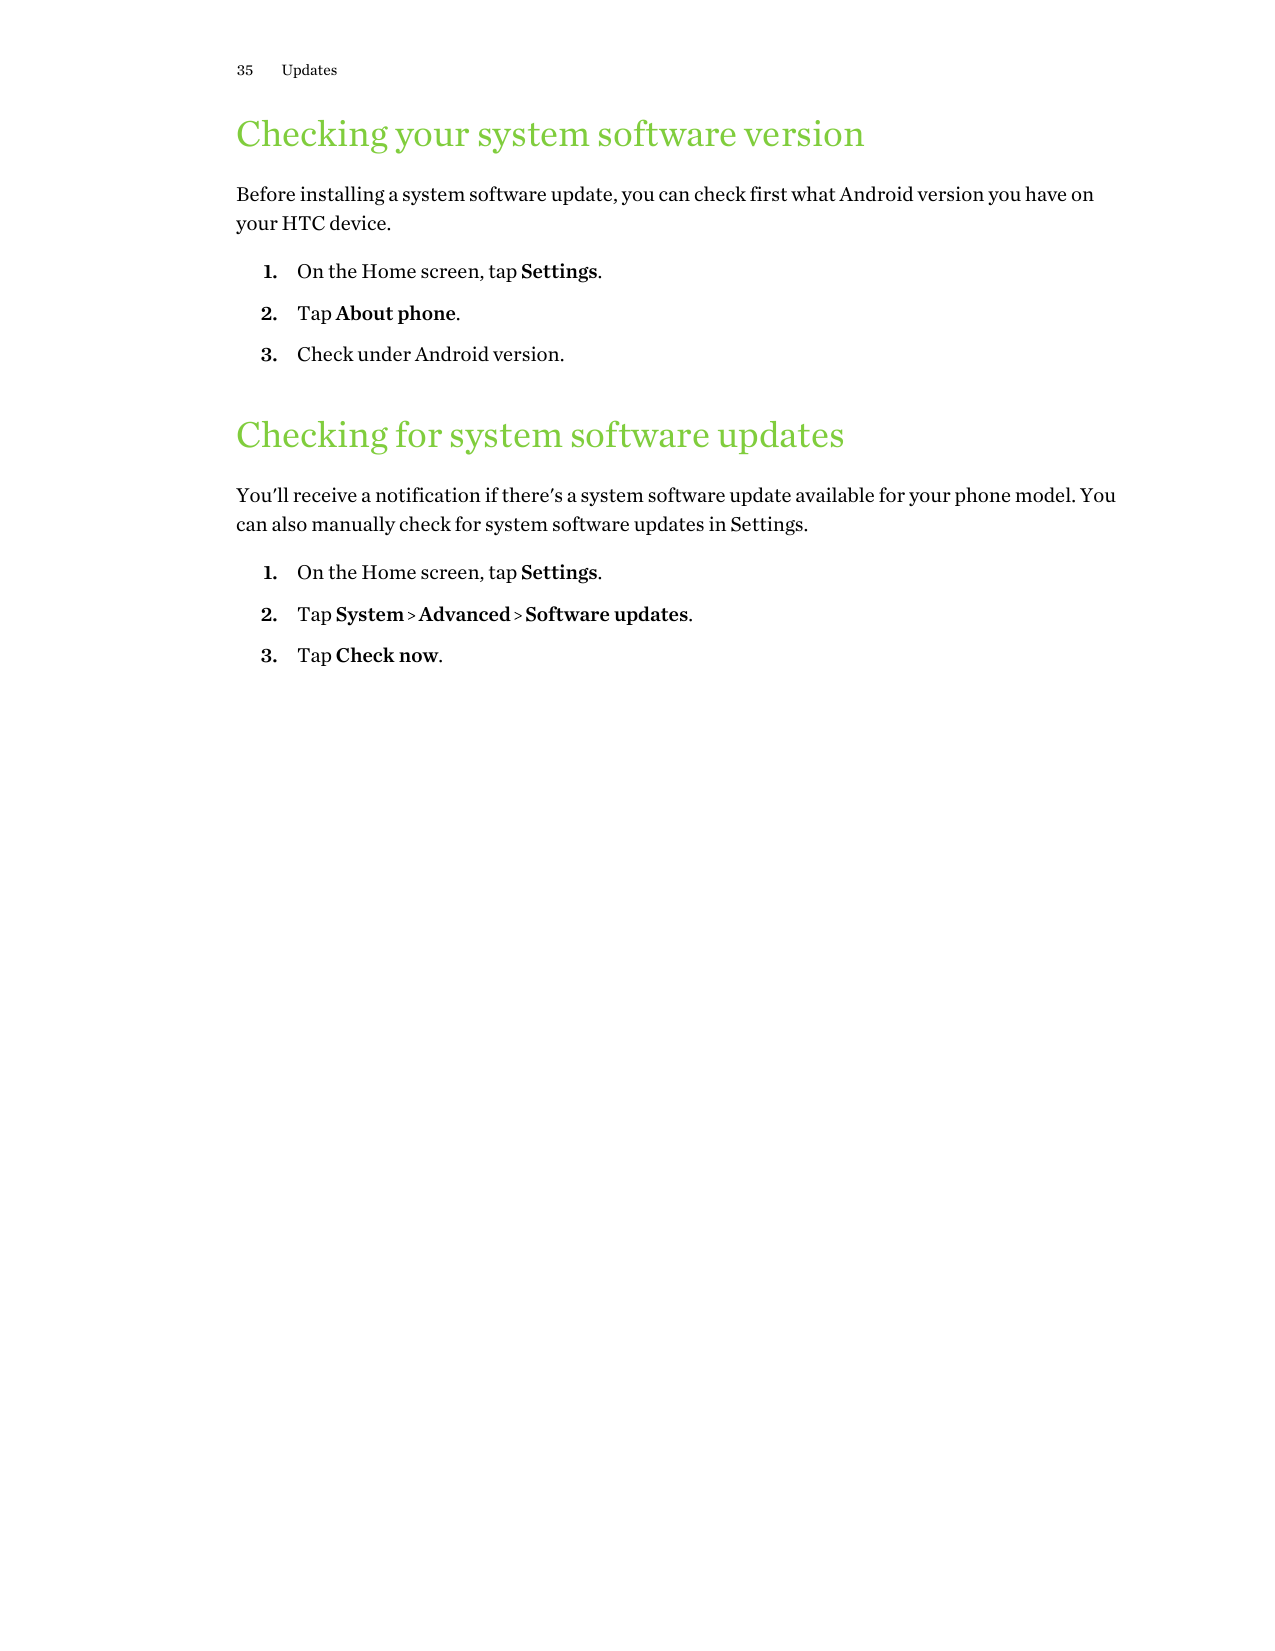 35UpdatesChecking your system software versionBefore installing a system software update, you can check first what Android versi